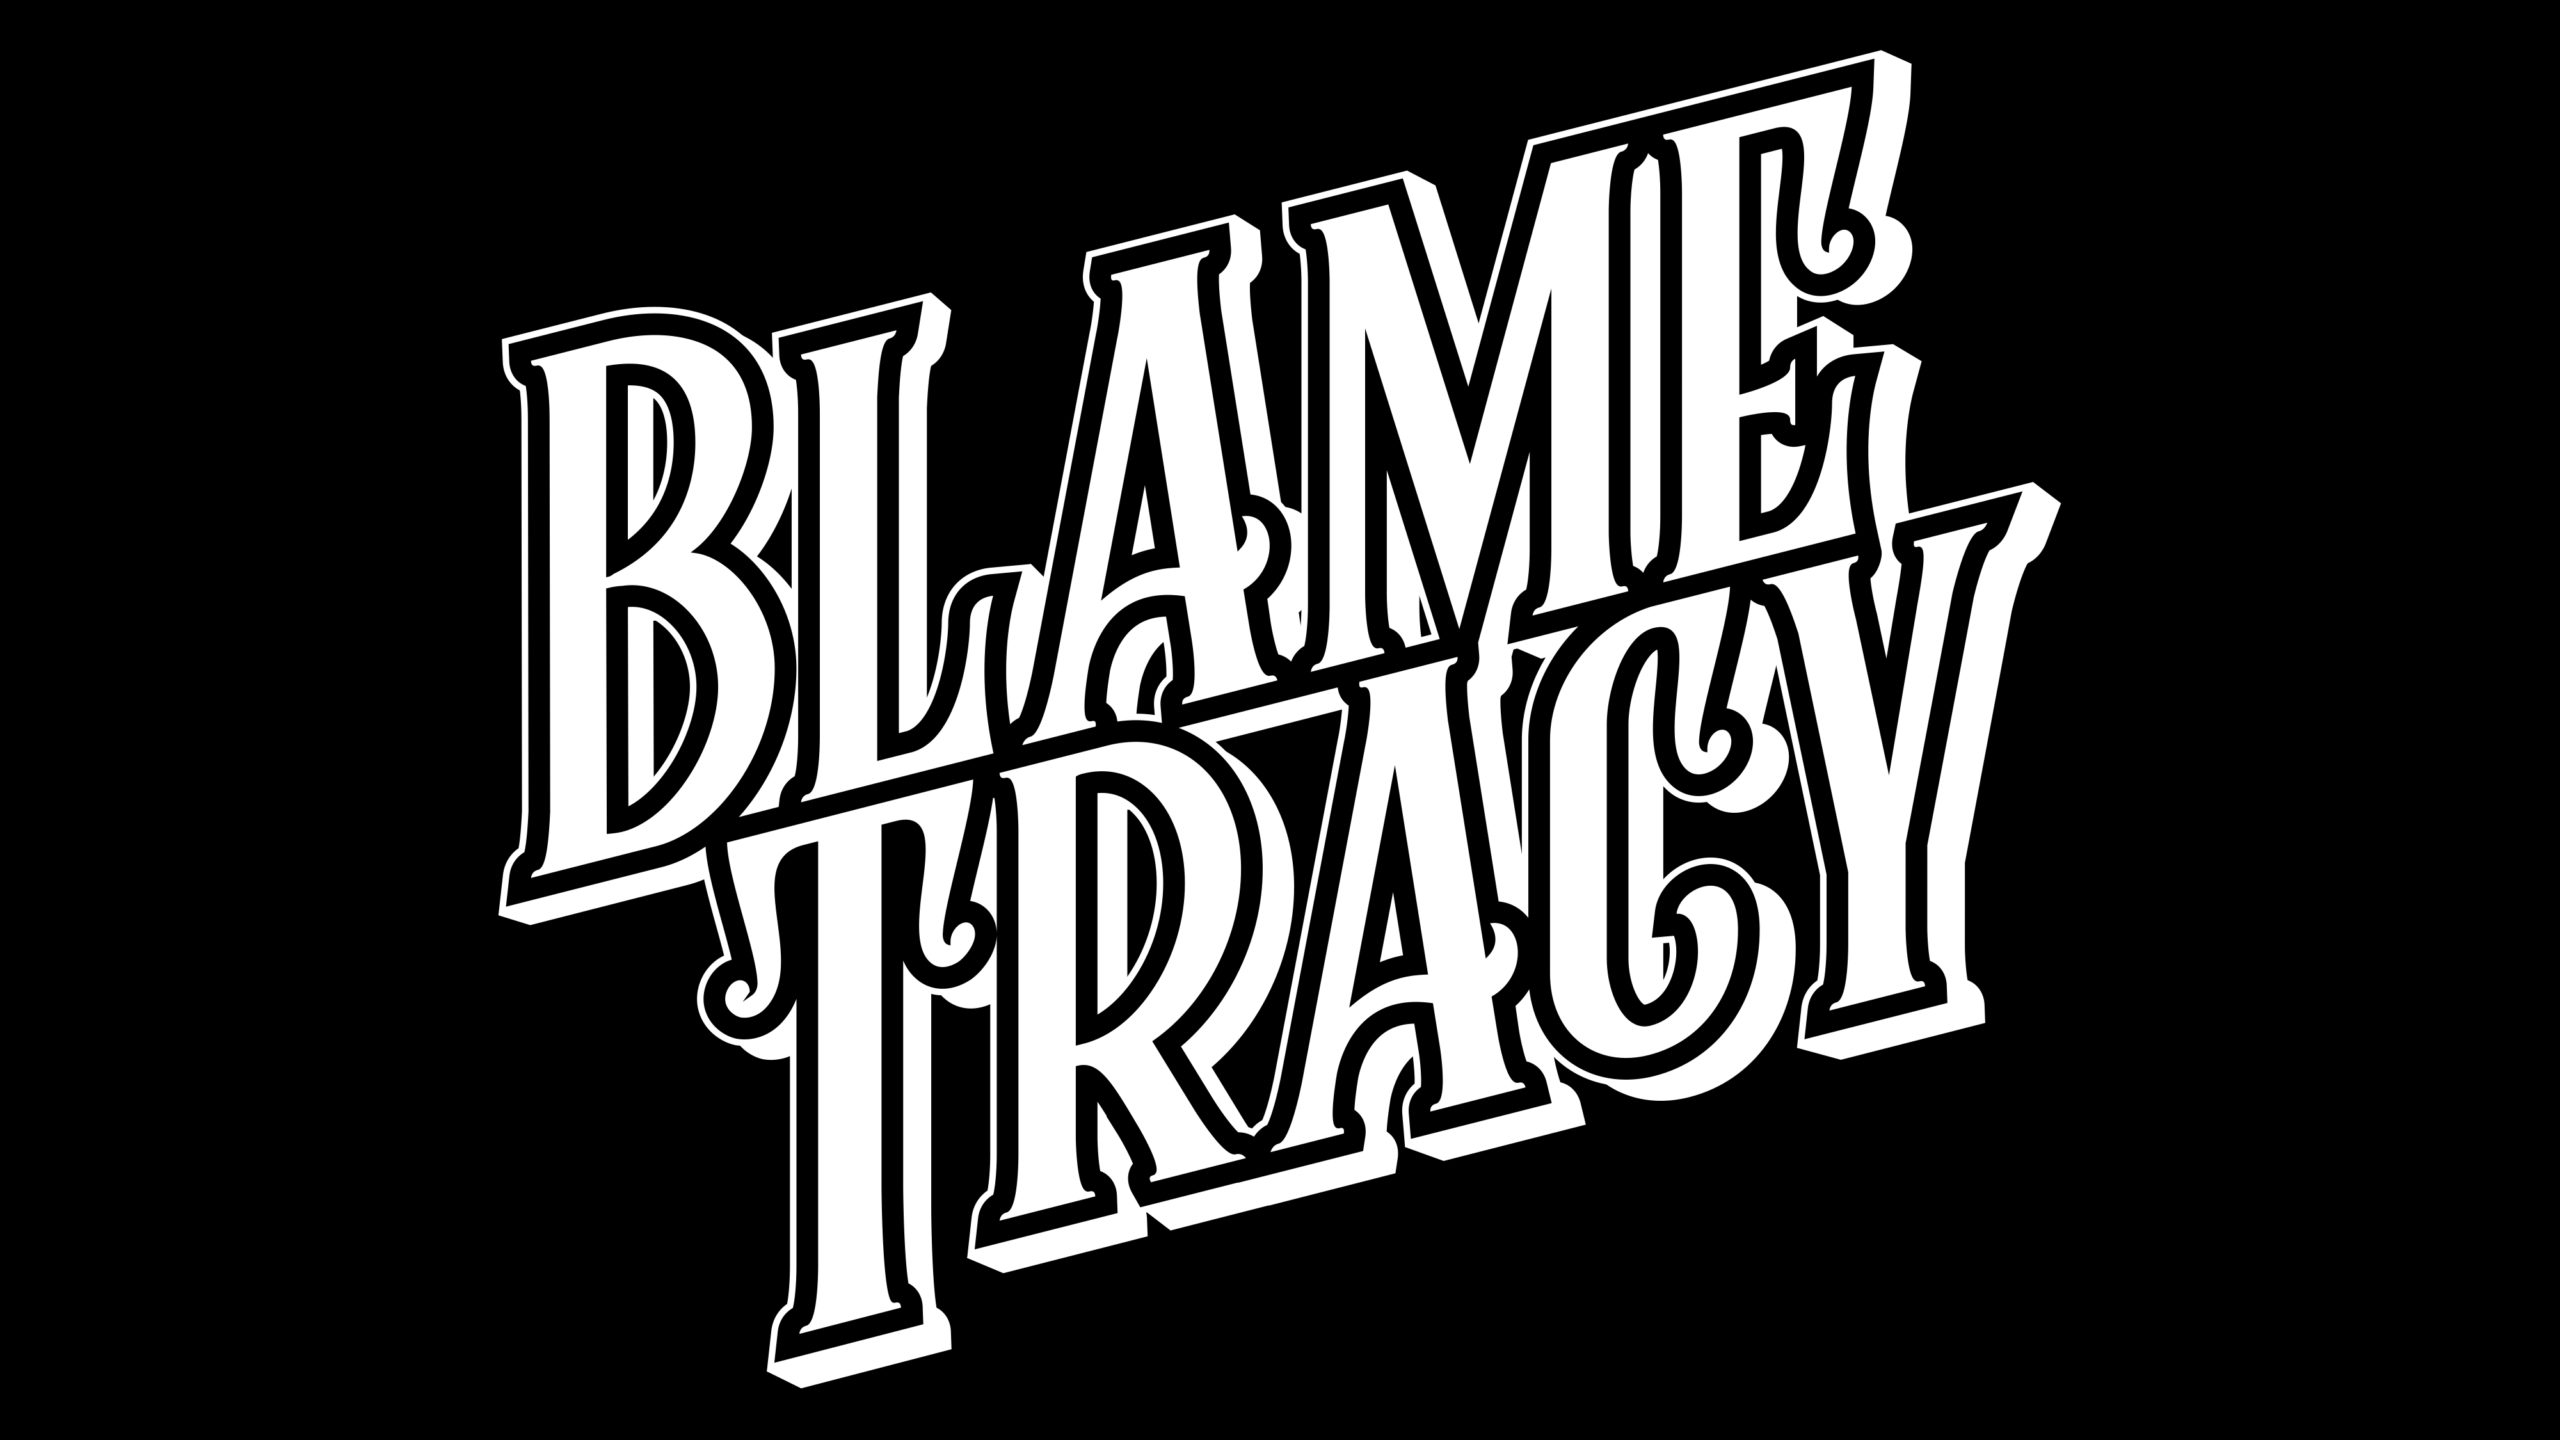 Save the date: Blame Tracy